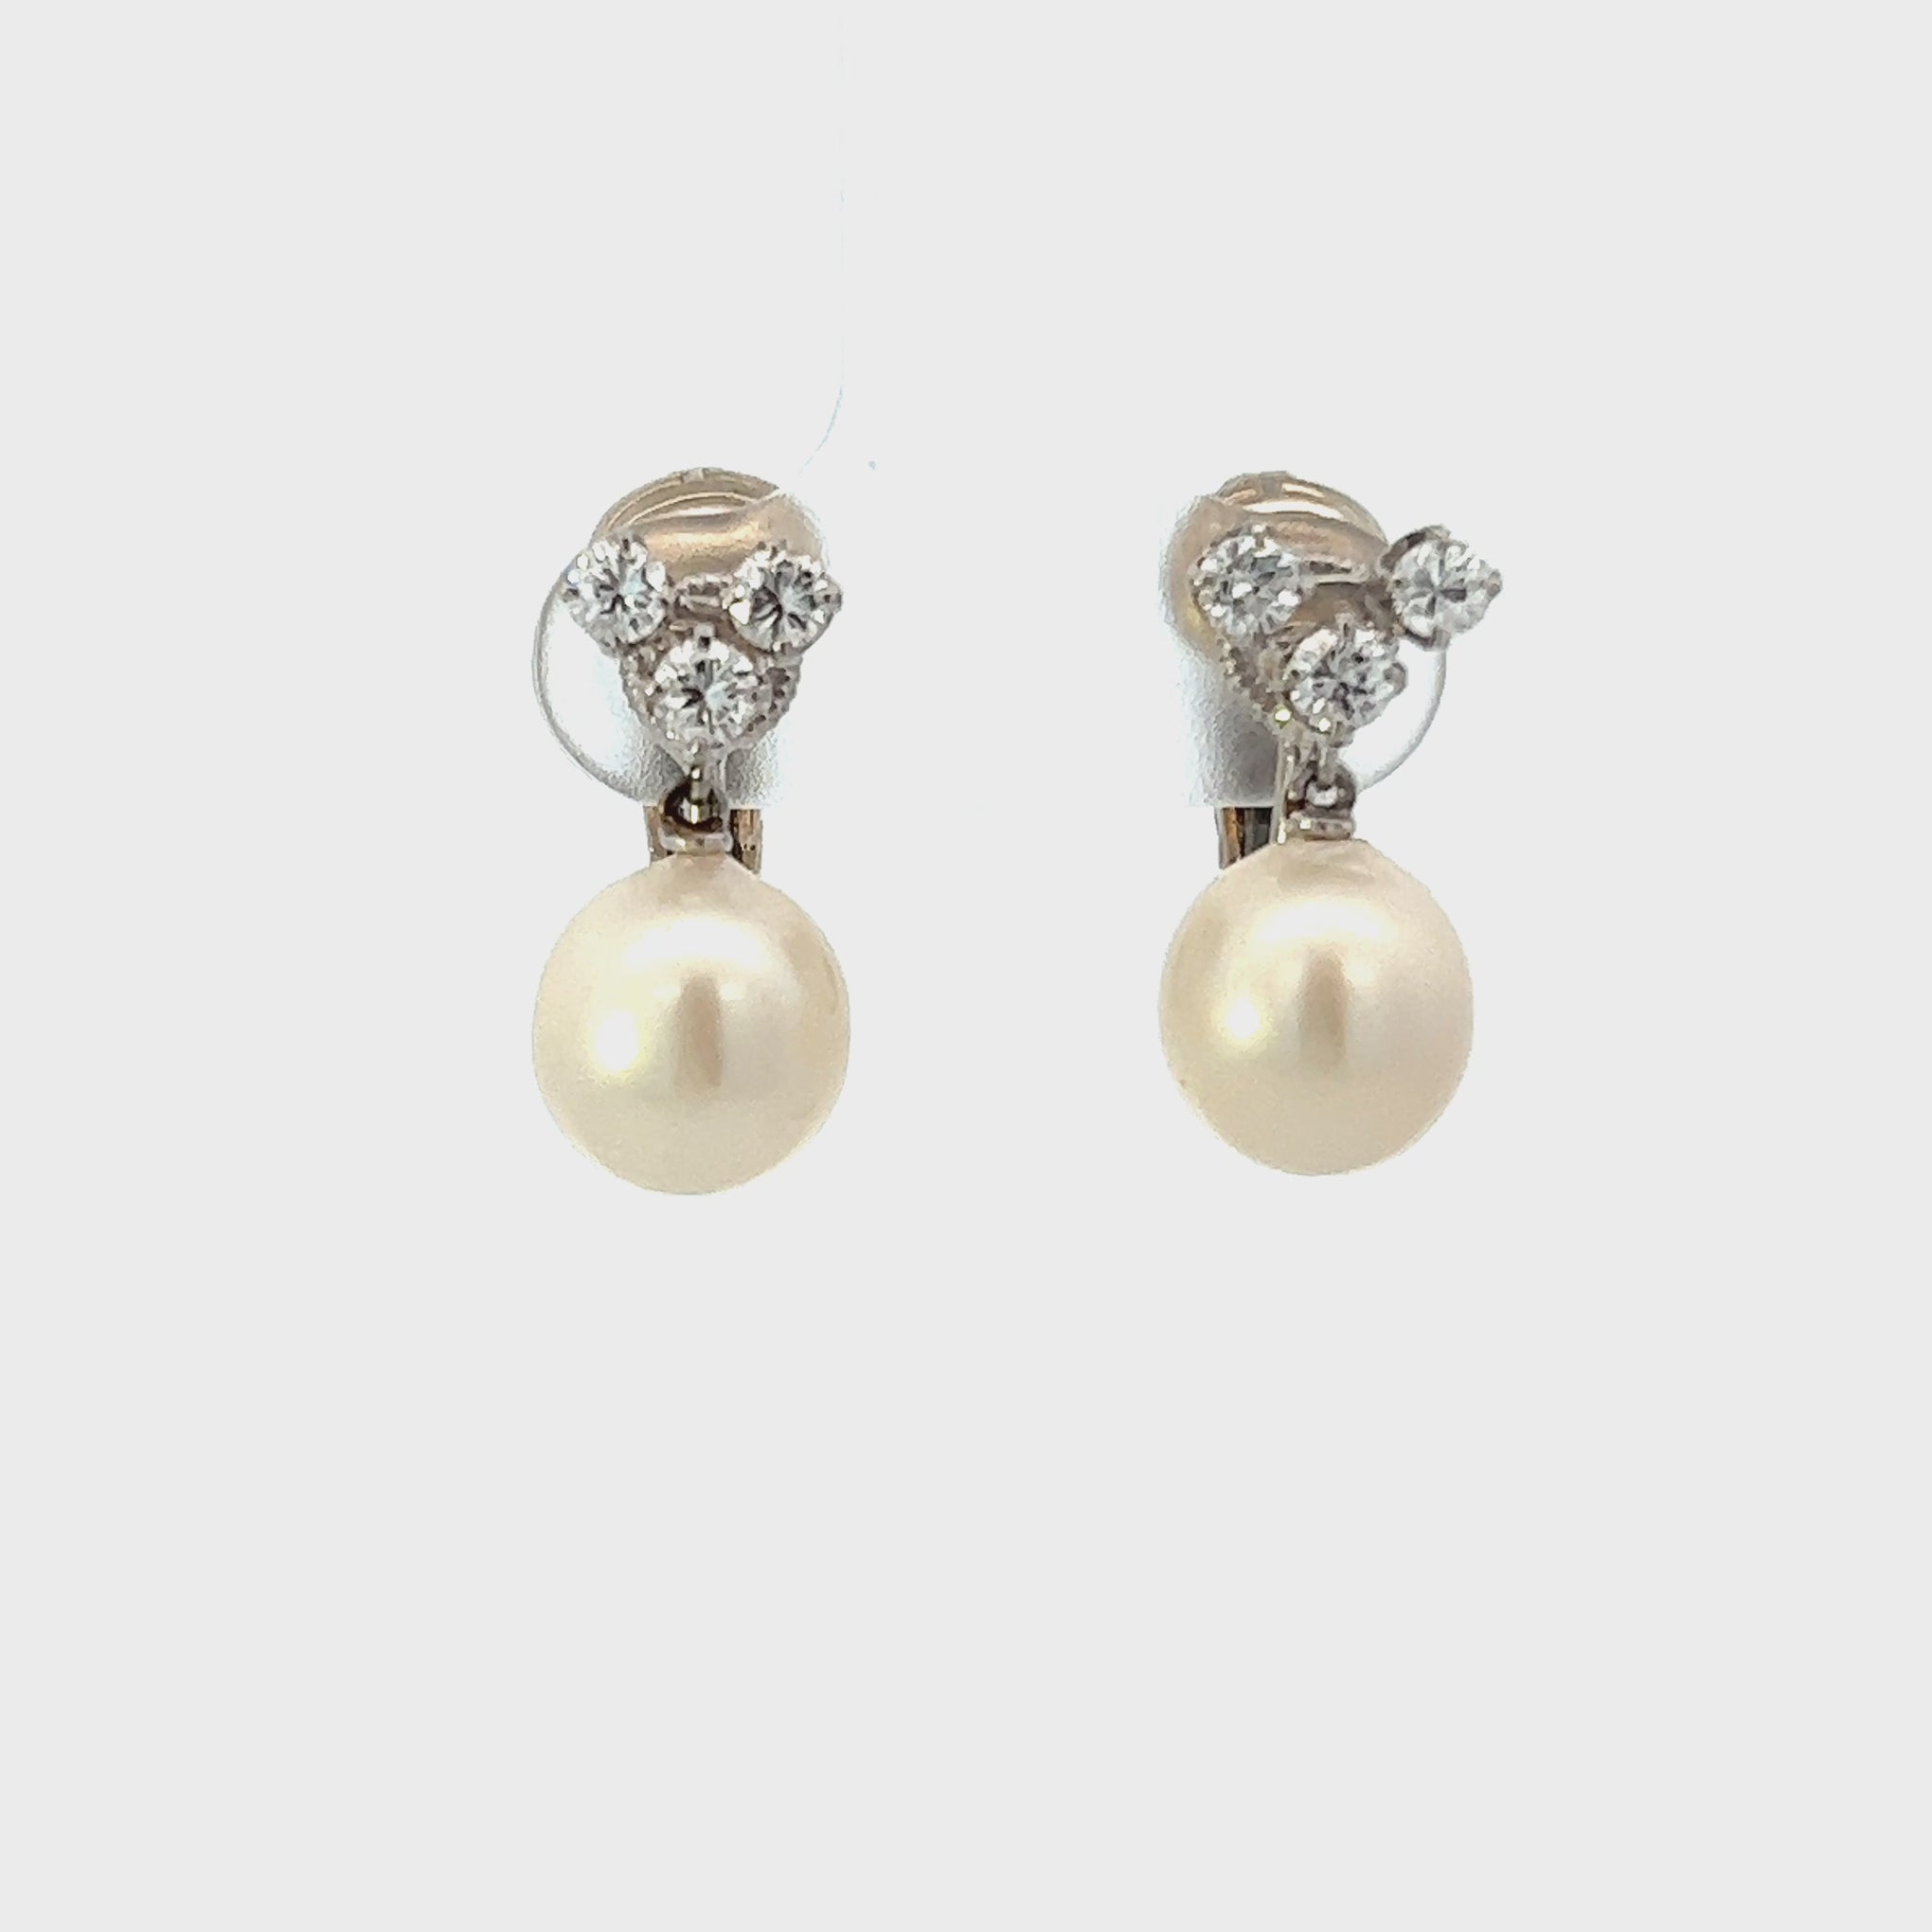 Vintage 14KT White Gold Pearl And Diamond Earrings